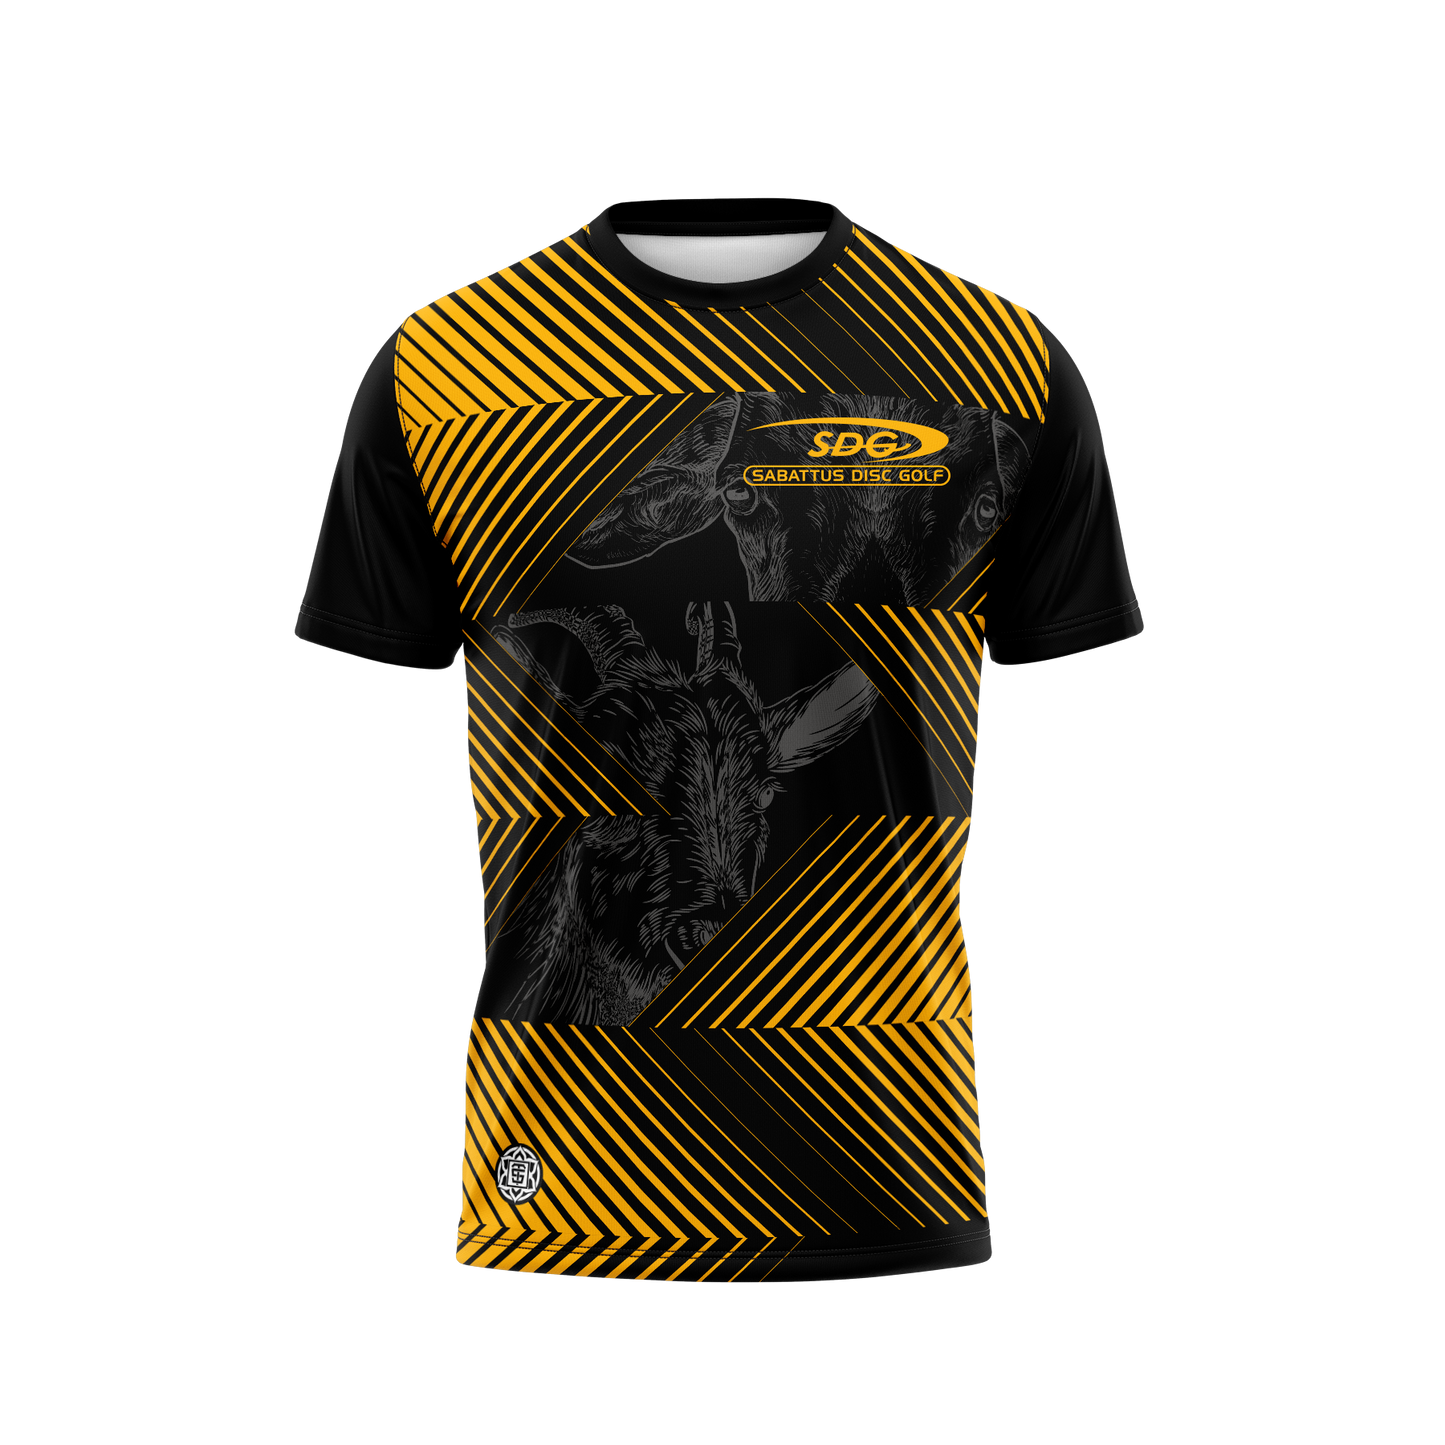 crittercontrolcincinnati Jersey Designed by Thought Space Athletics Black and Yellow with Goat Graphics front view